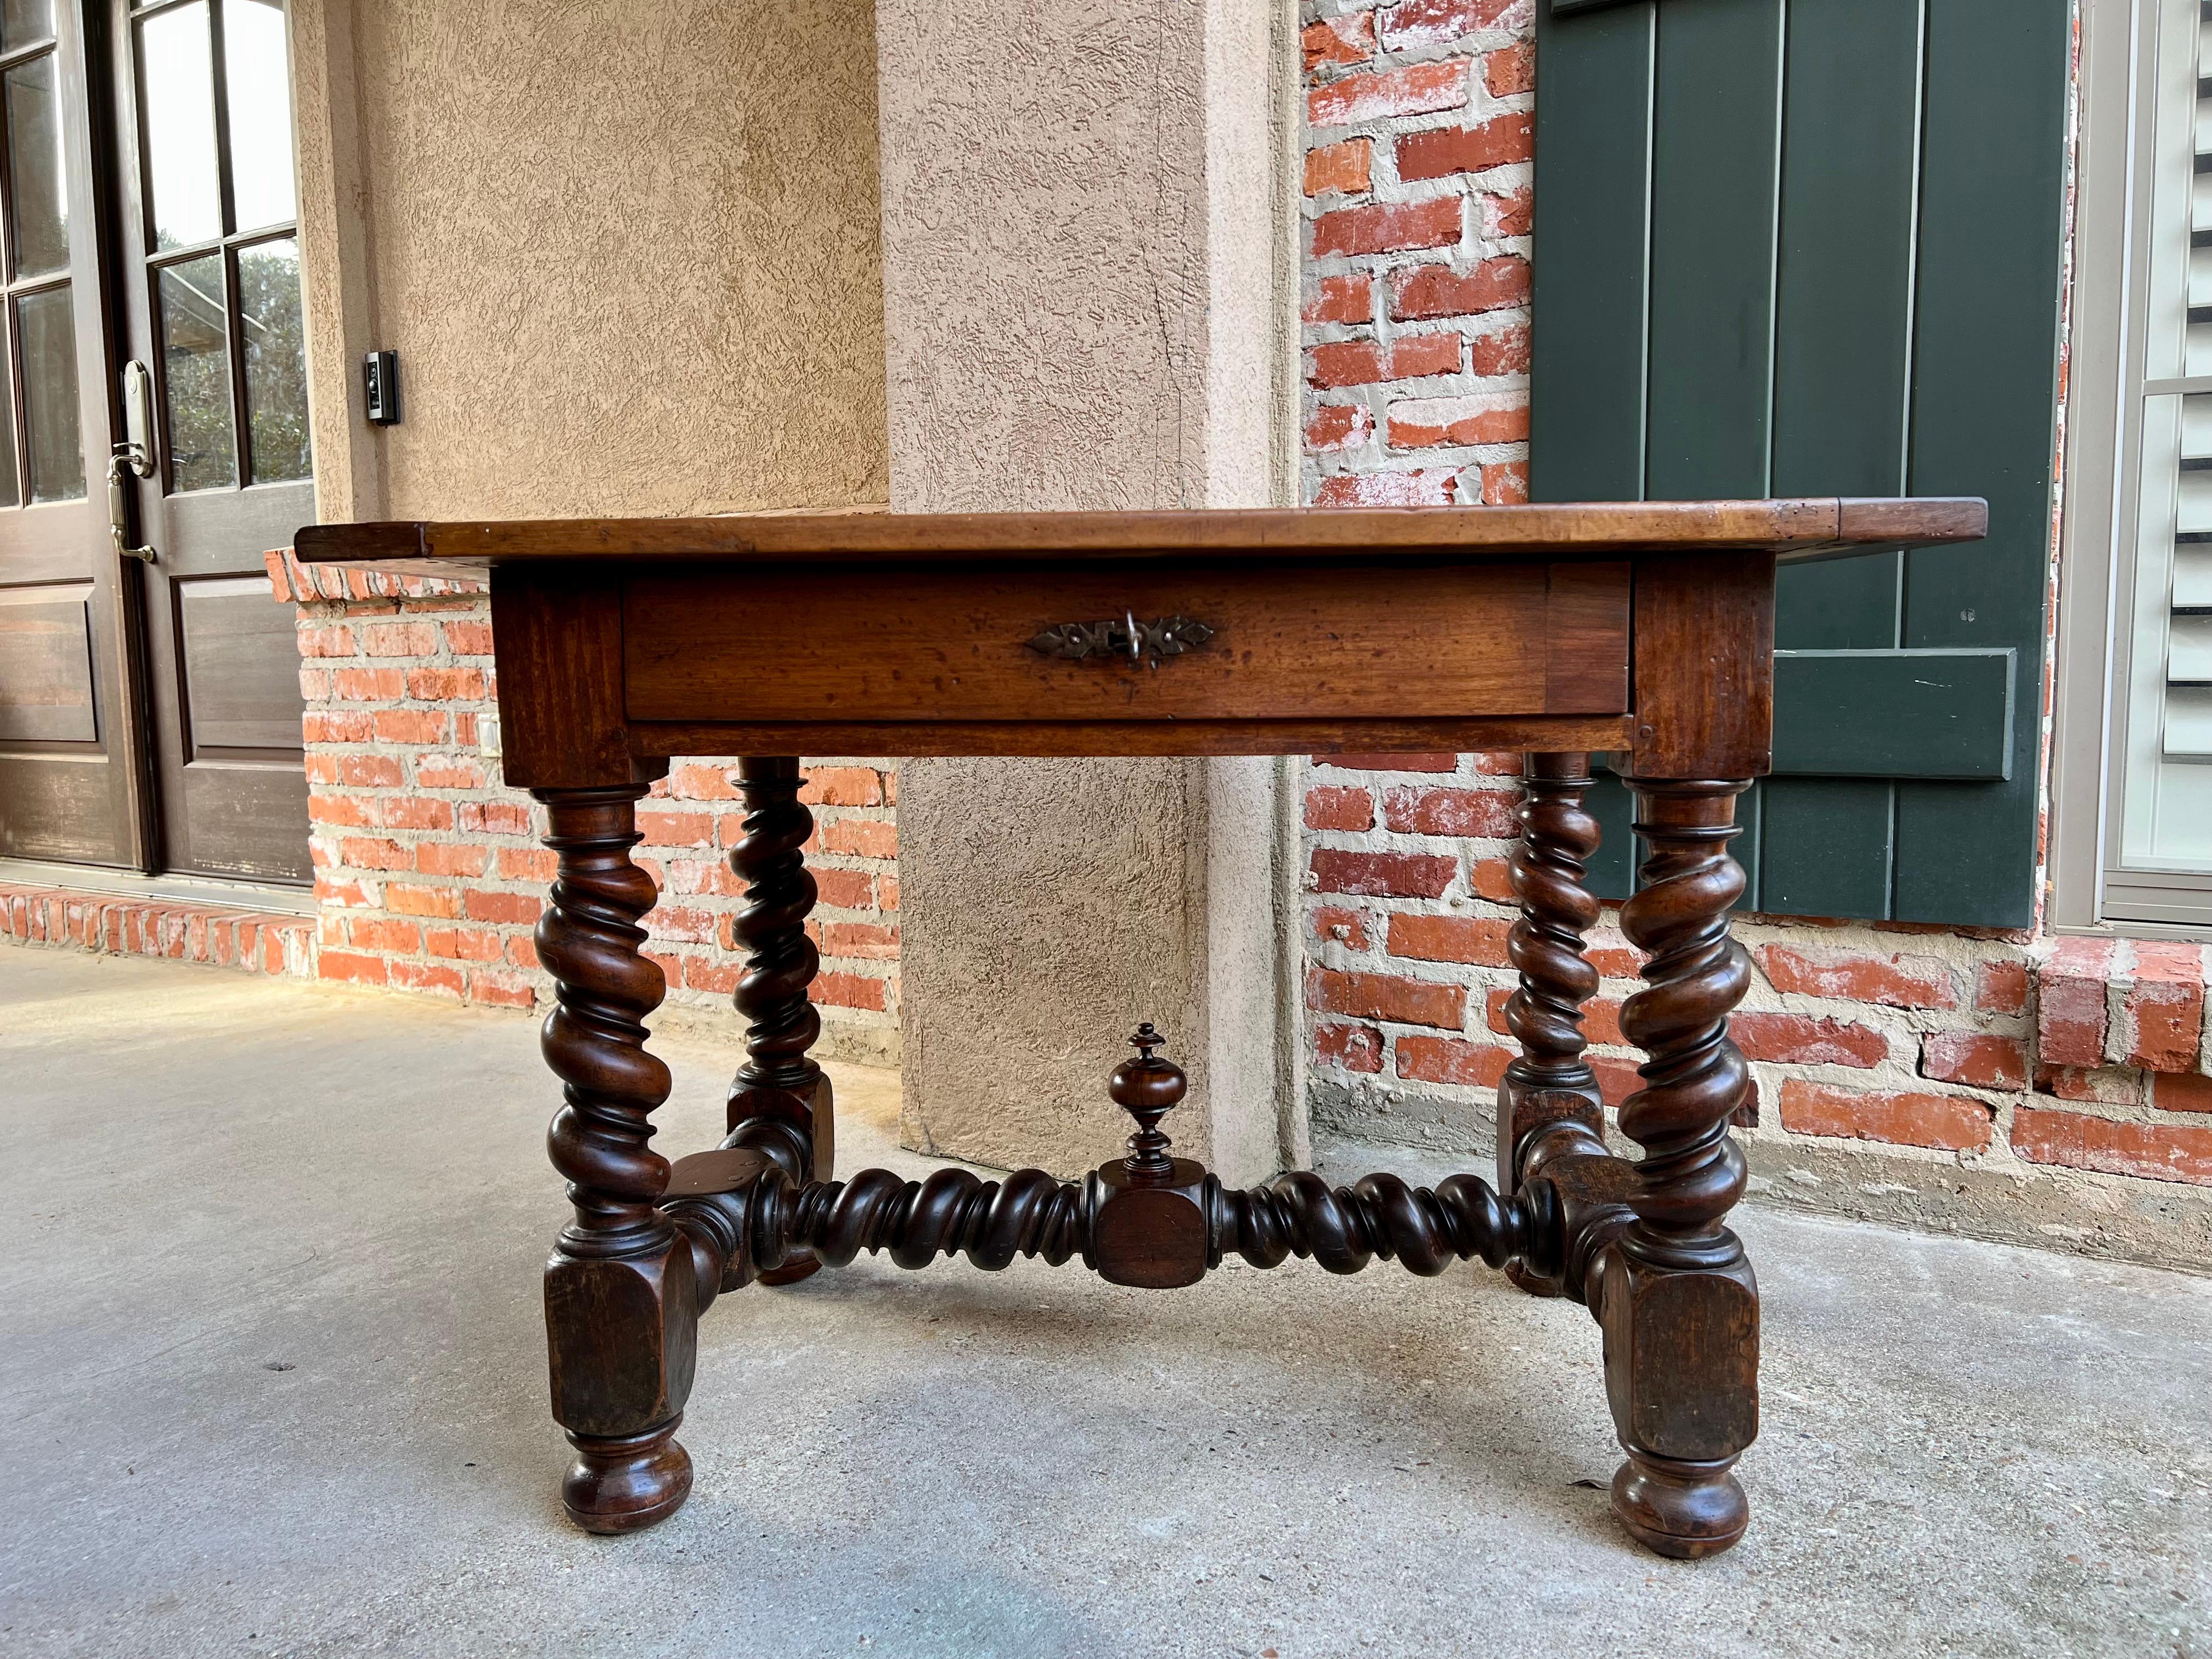 18th Century French Walnut Side Sofa Table Barley Twist Desk Louis XIII.

Direct from France, this incredible 18th century French center table or writing desk. Fabulous, thick, hand turned barley twist legs with large, pegged block joints. Superb